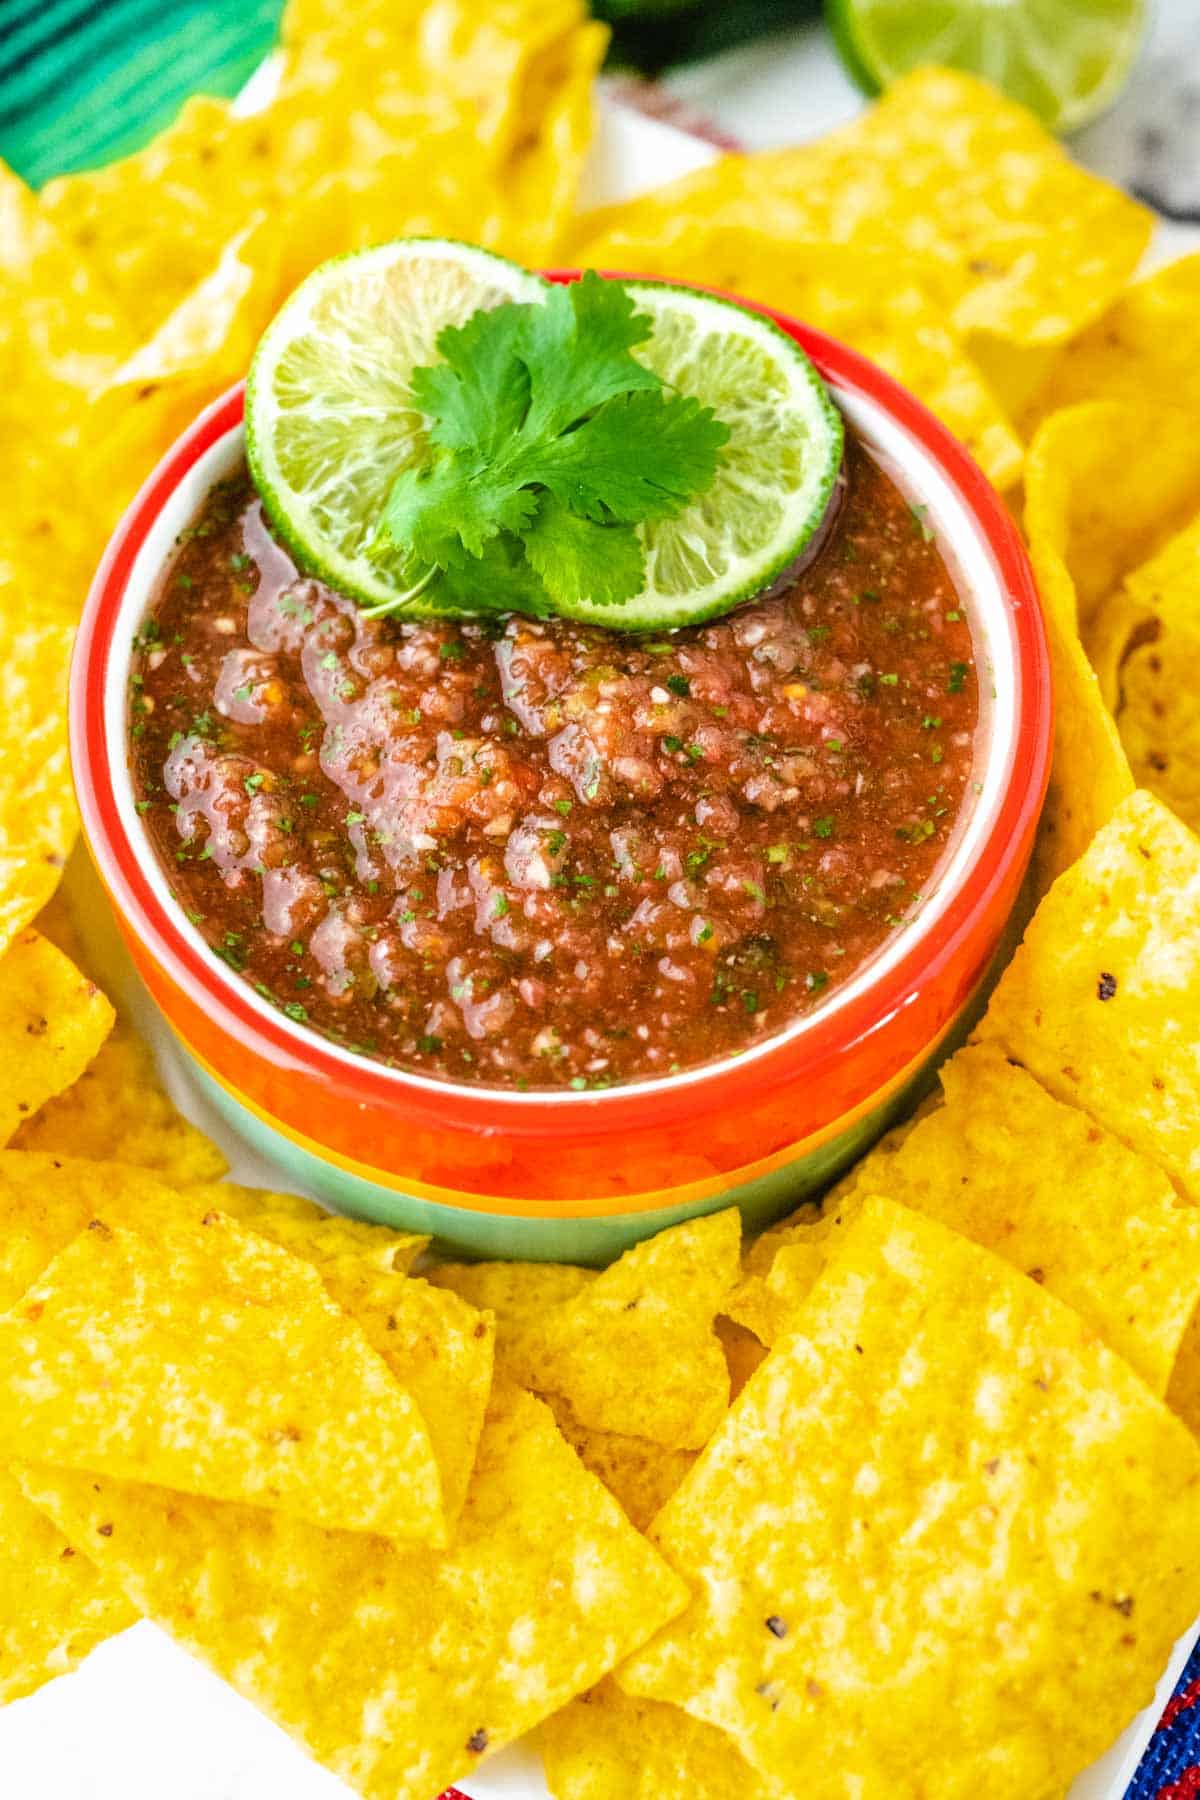 A colorful bowl of copycat Chili's salsa garnished with lime slices and cilantro with tortilla chips around the bowl.